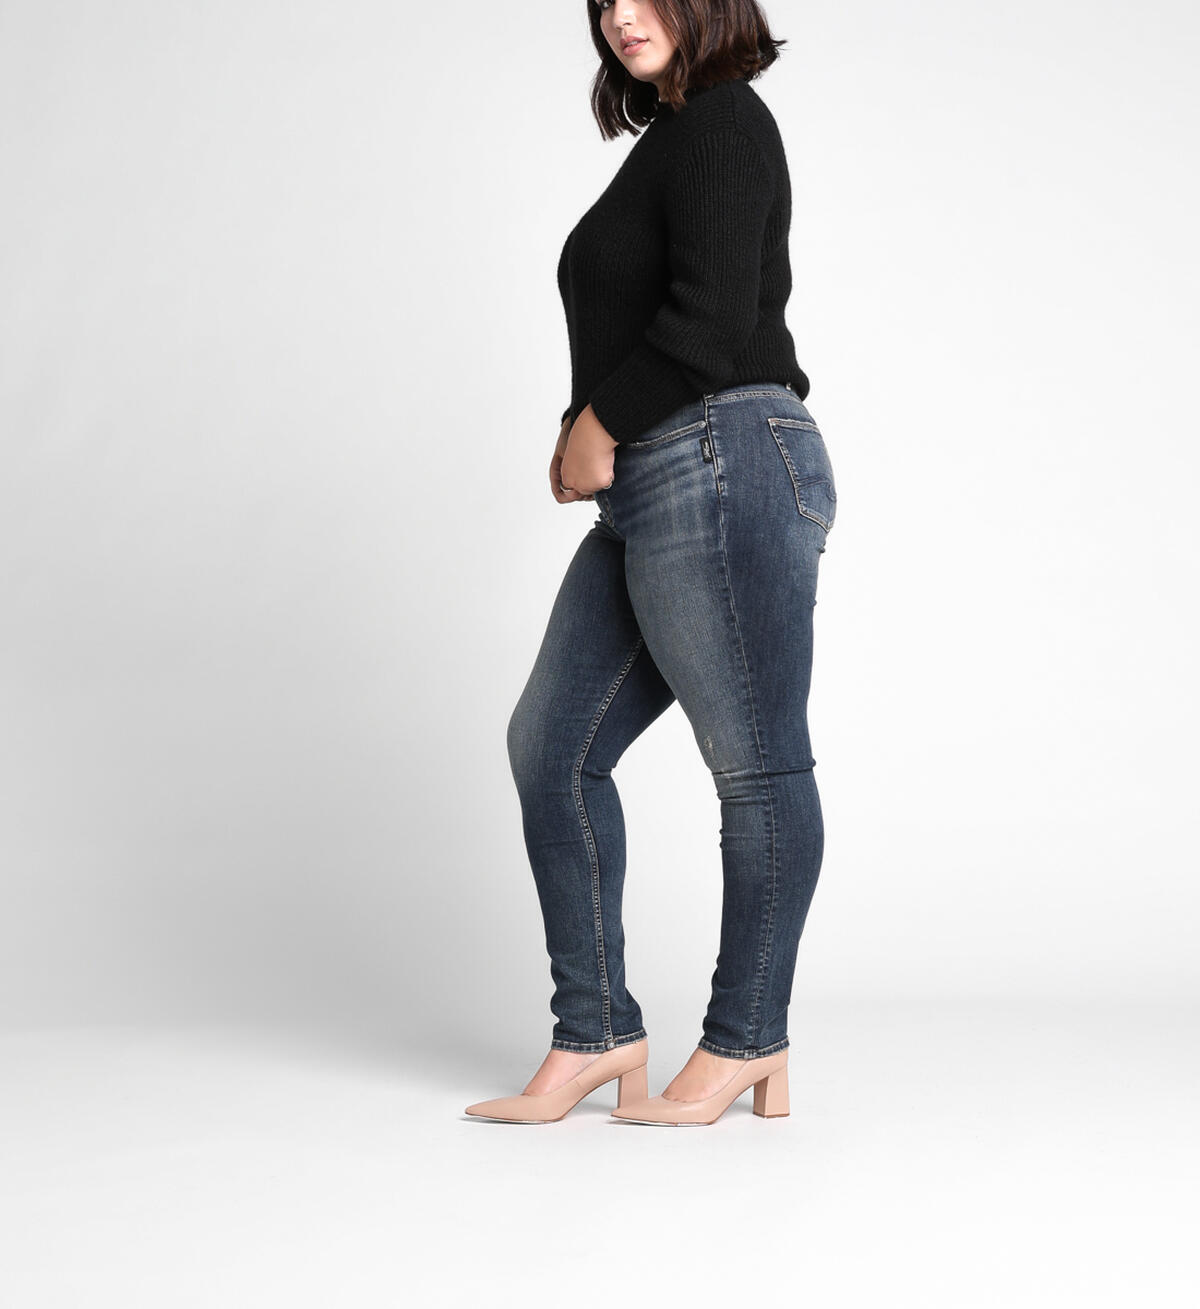 Avery High Rise Slim Leg Jeans Plus Size Final Sale, , hi-res image number 2